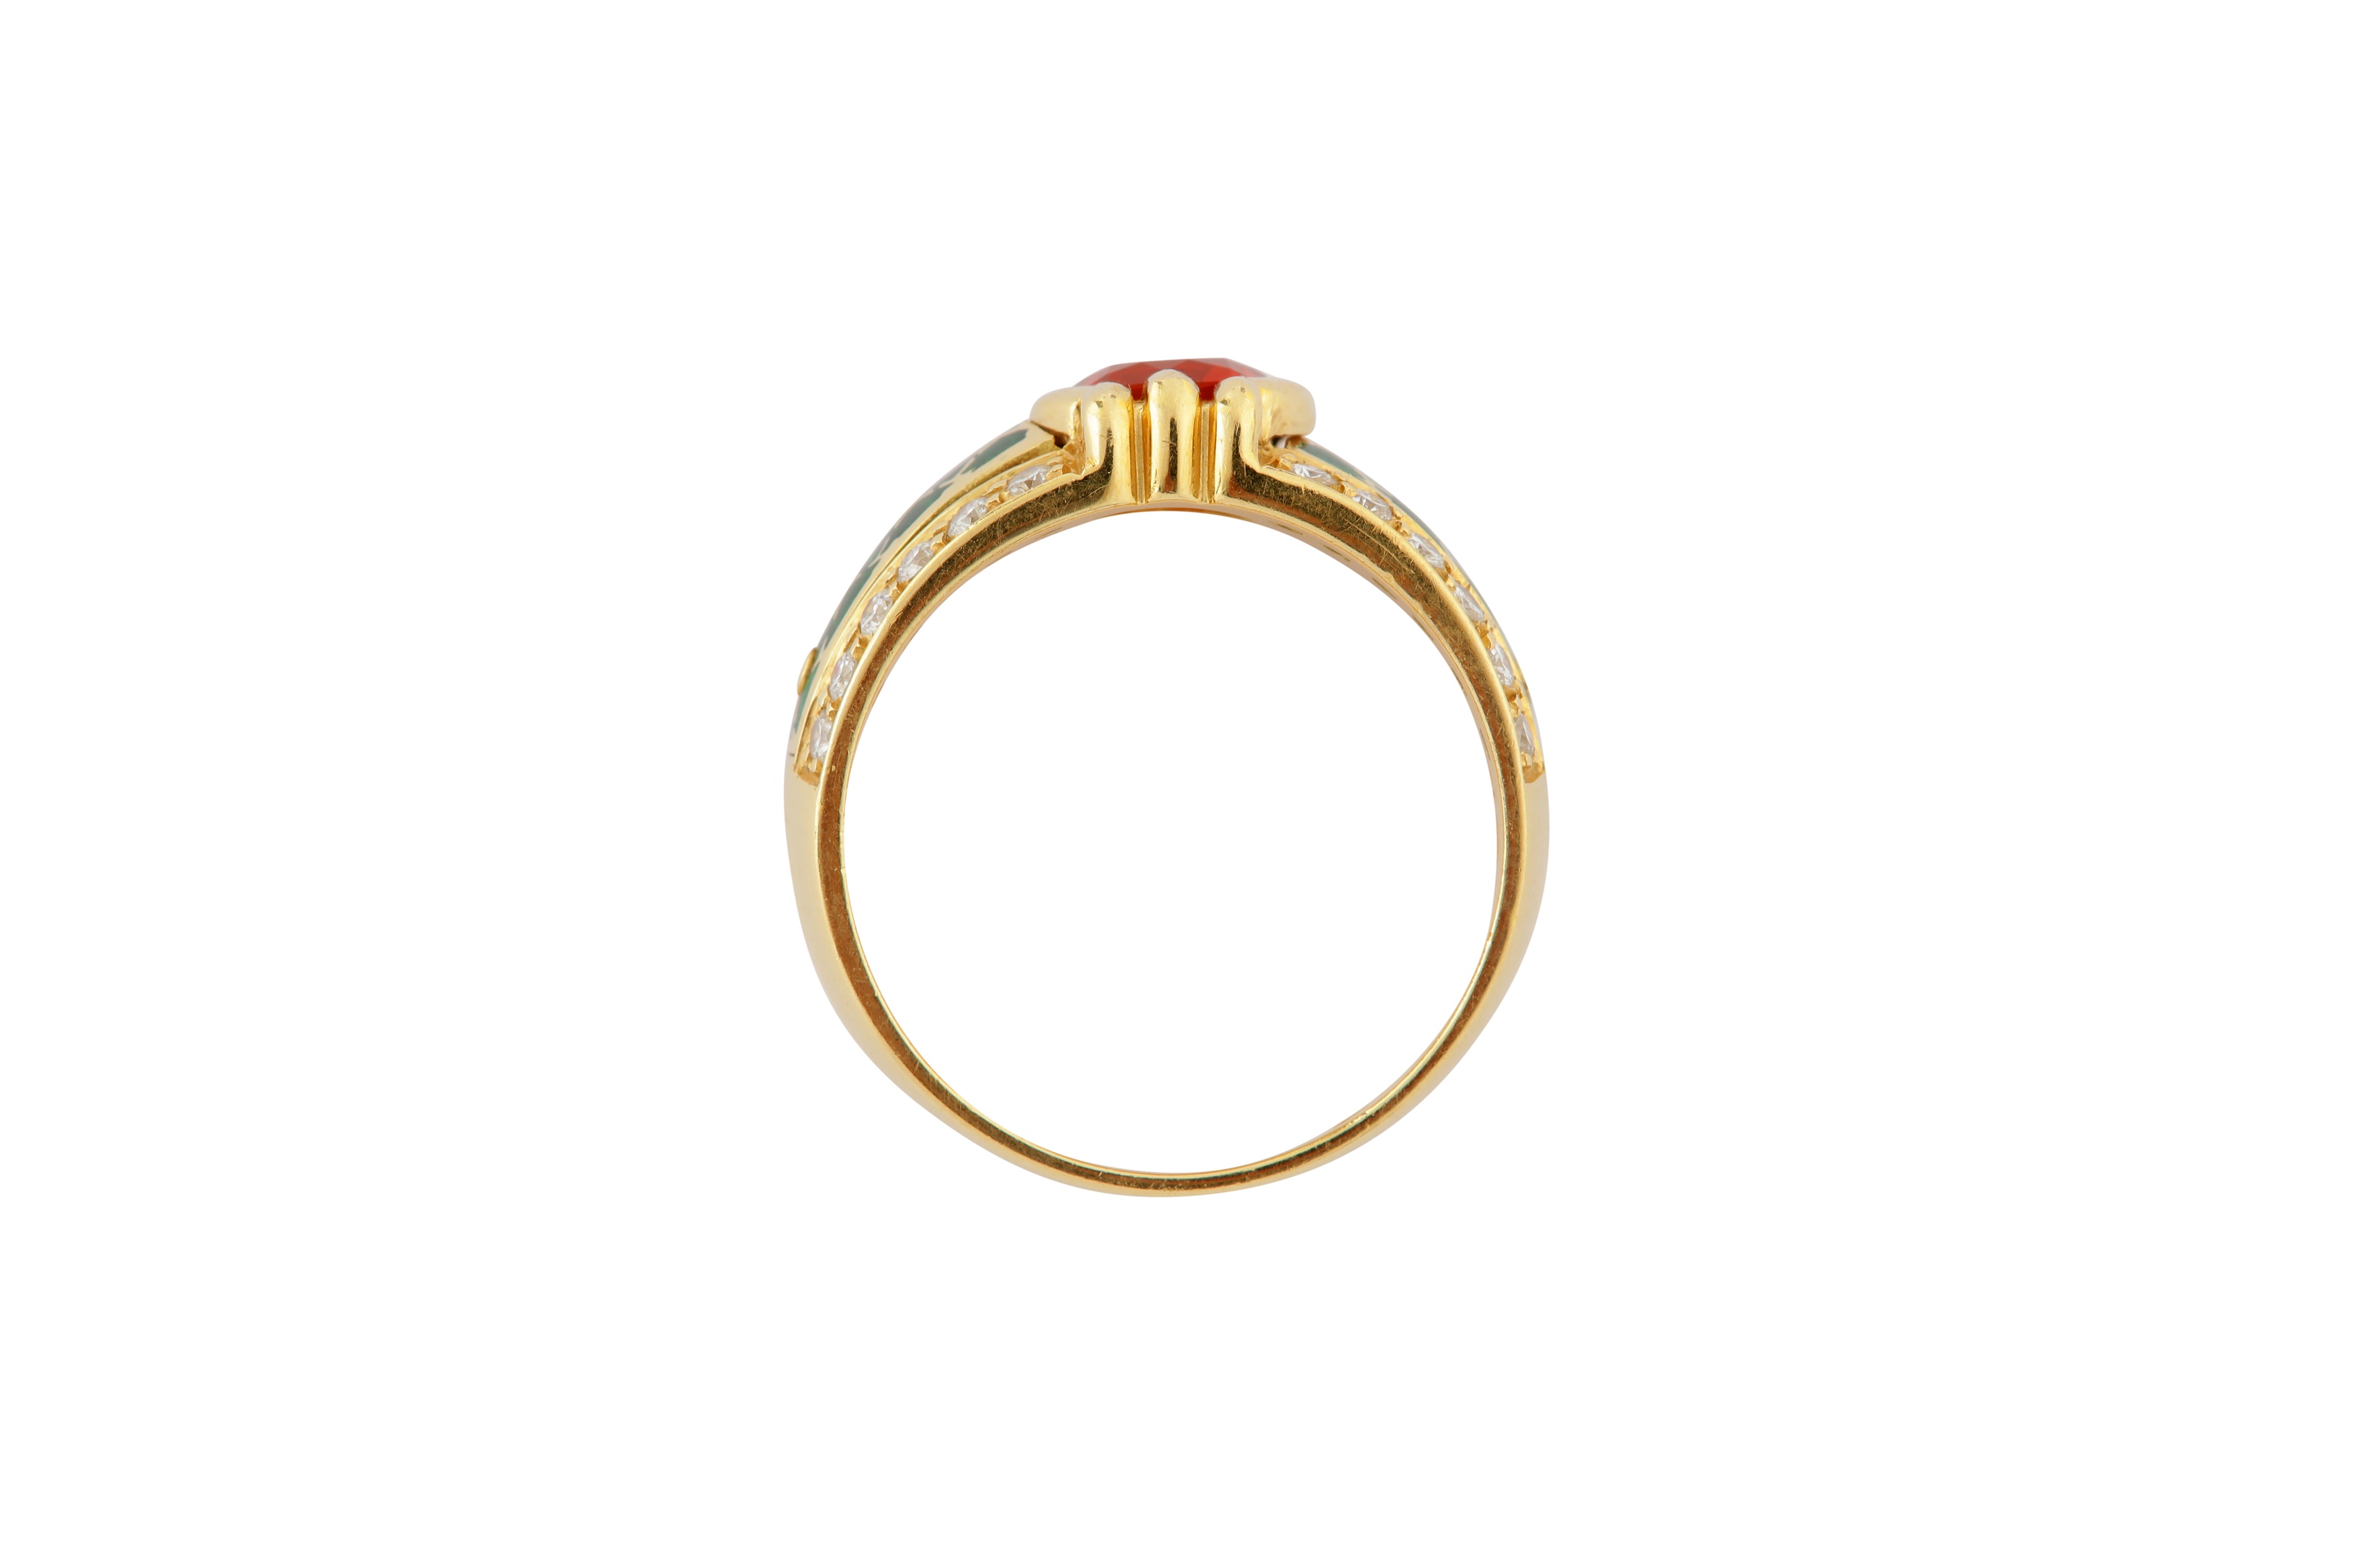 A FIRE OPAL, DIAMOND AND ENAMEL RING - Image 4 of 4